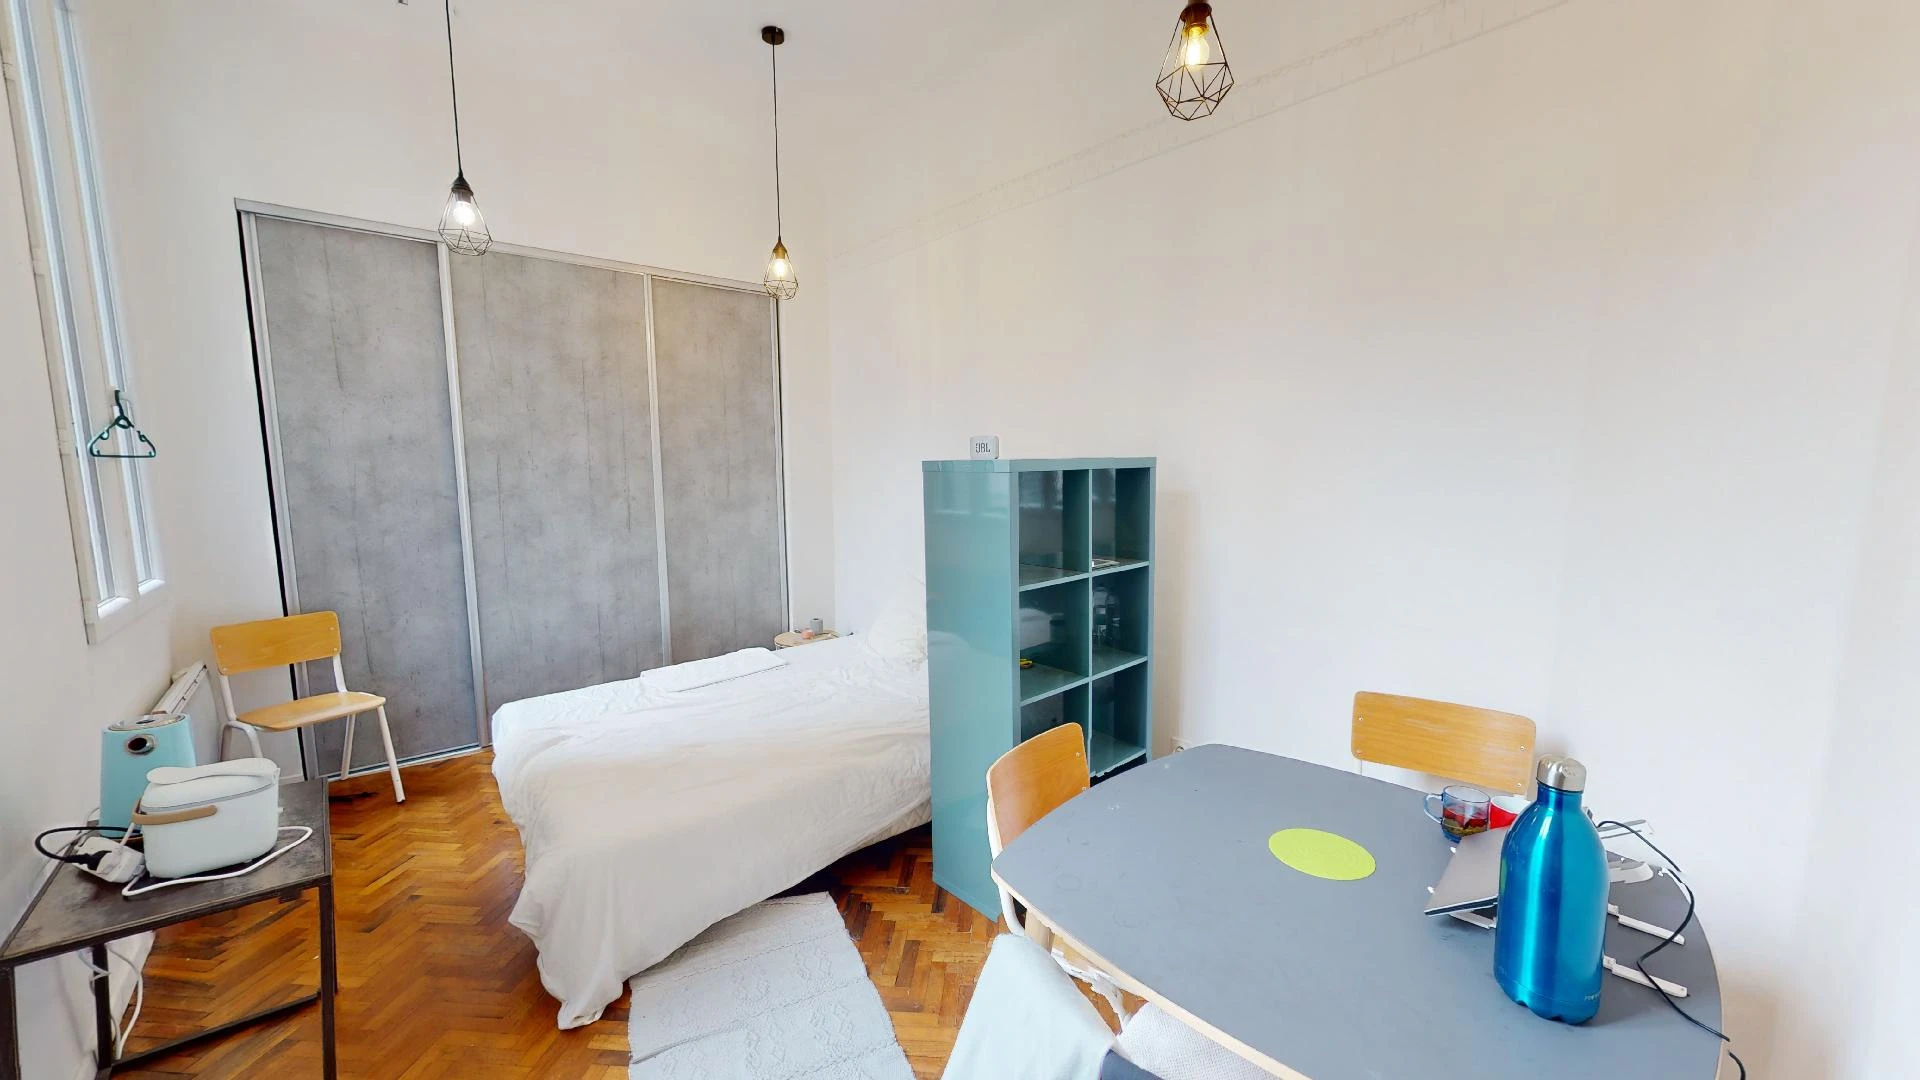 Renting rooms by the month in marseille